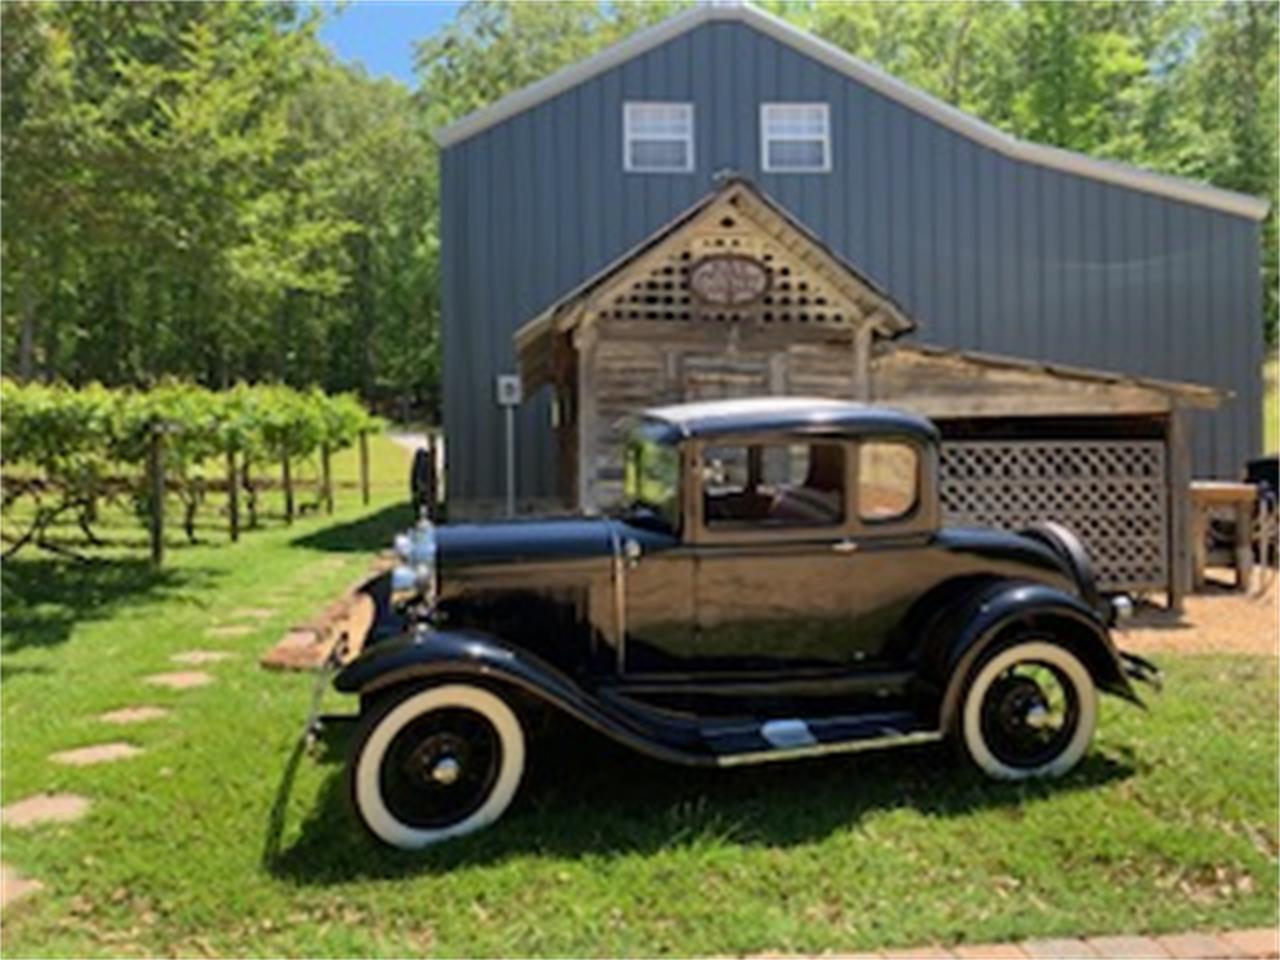 For Sale: 1930 Ford Model A in Tremont, Mississippi for sale in Tremont, MS